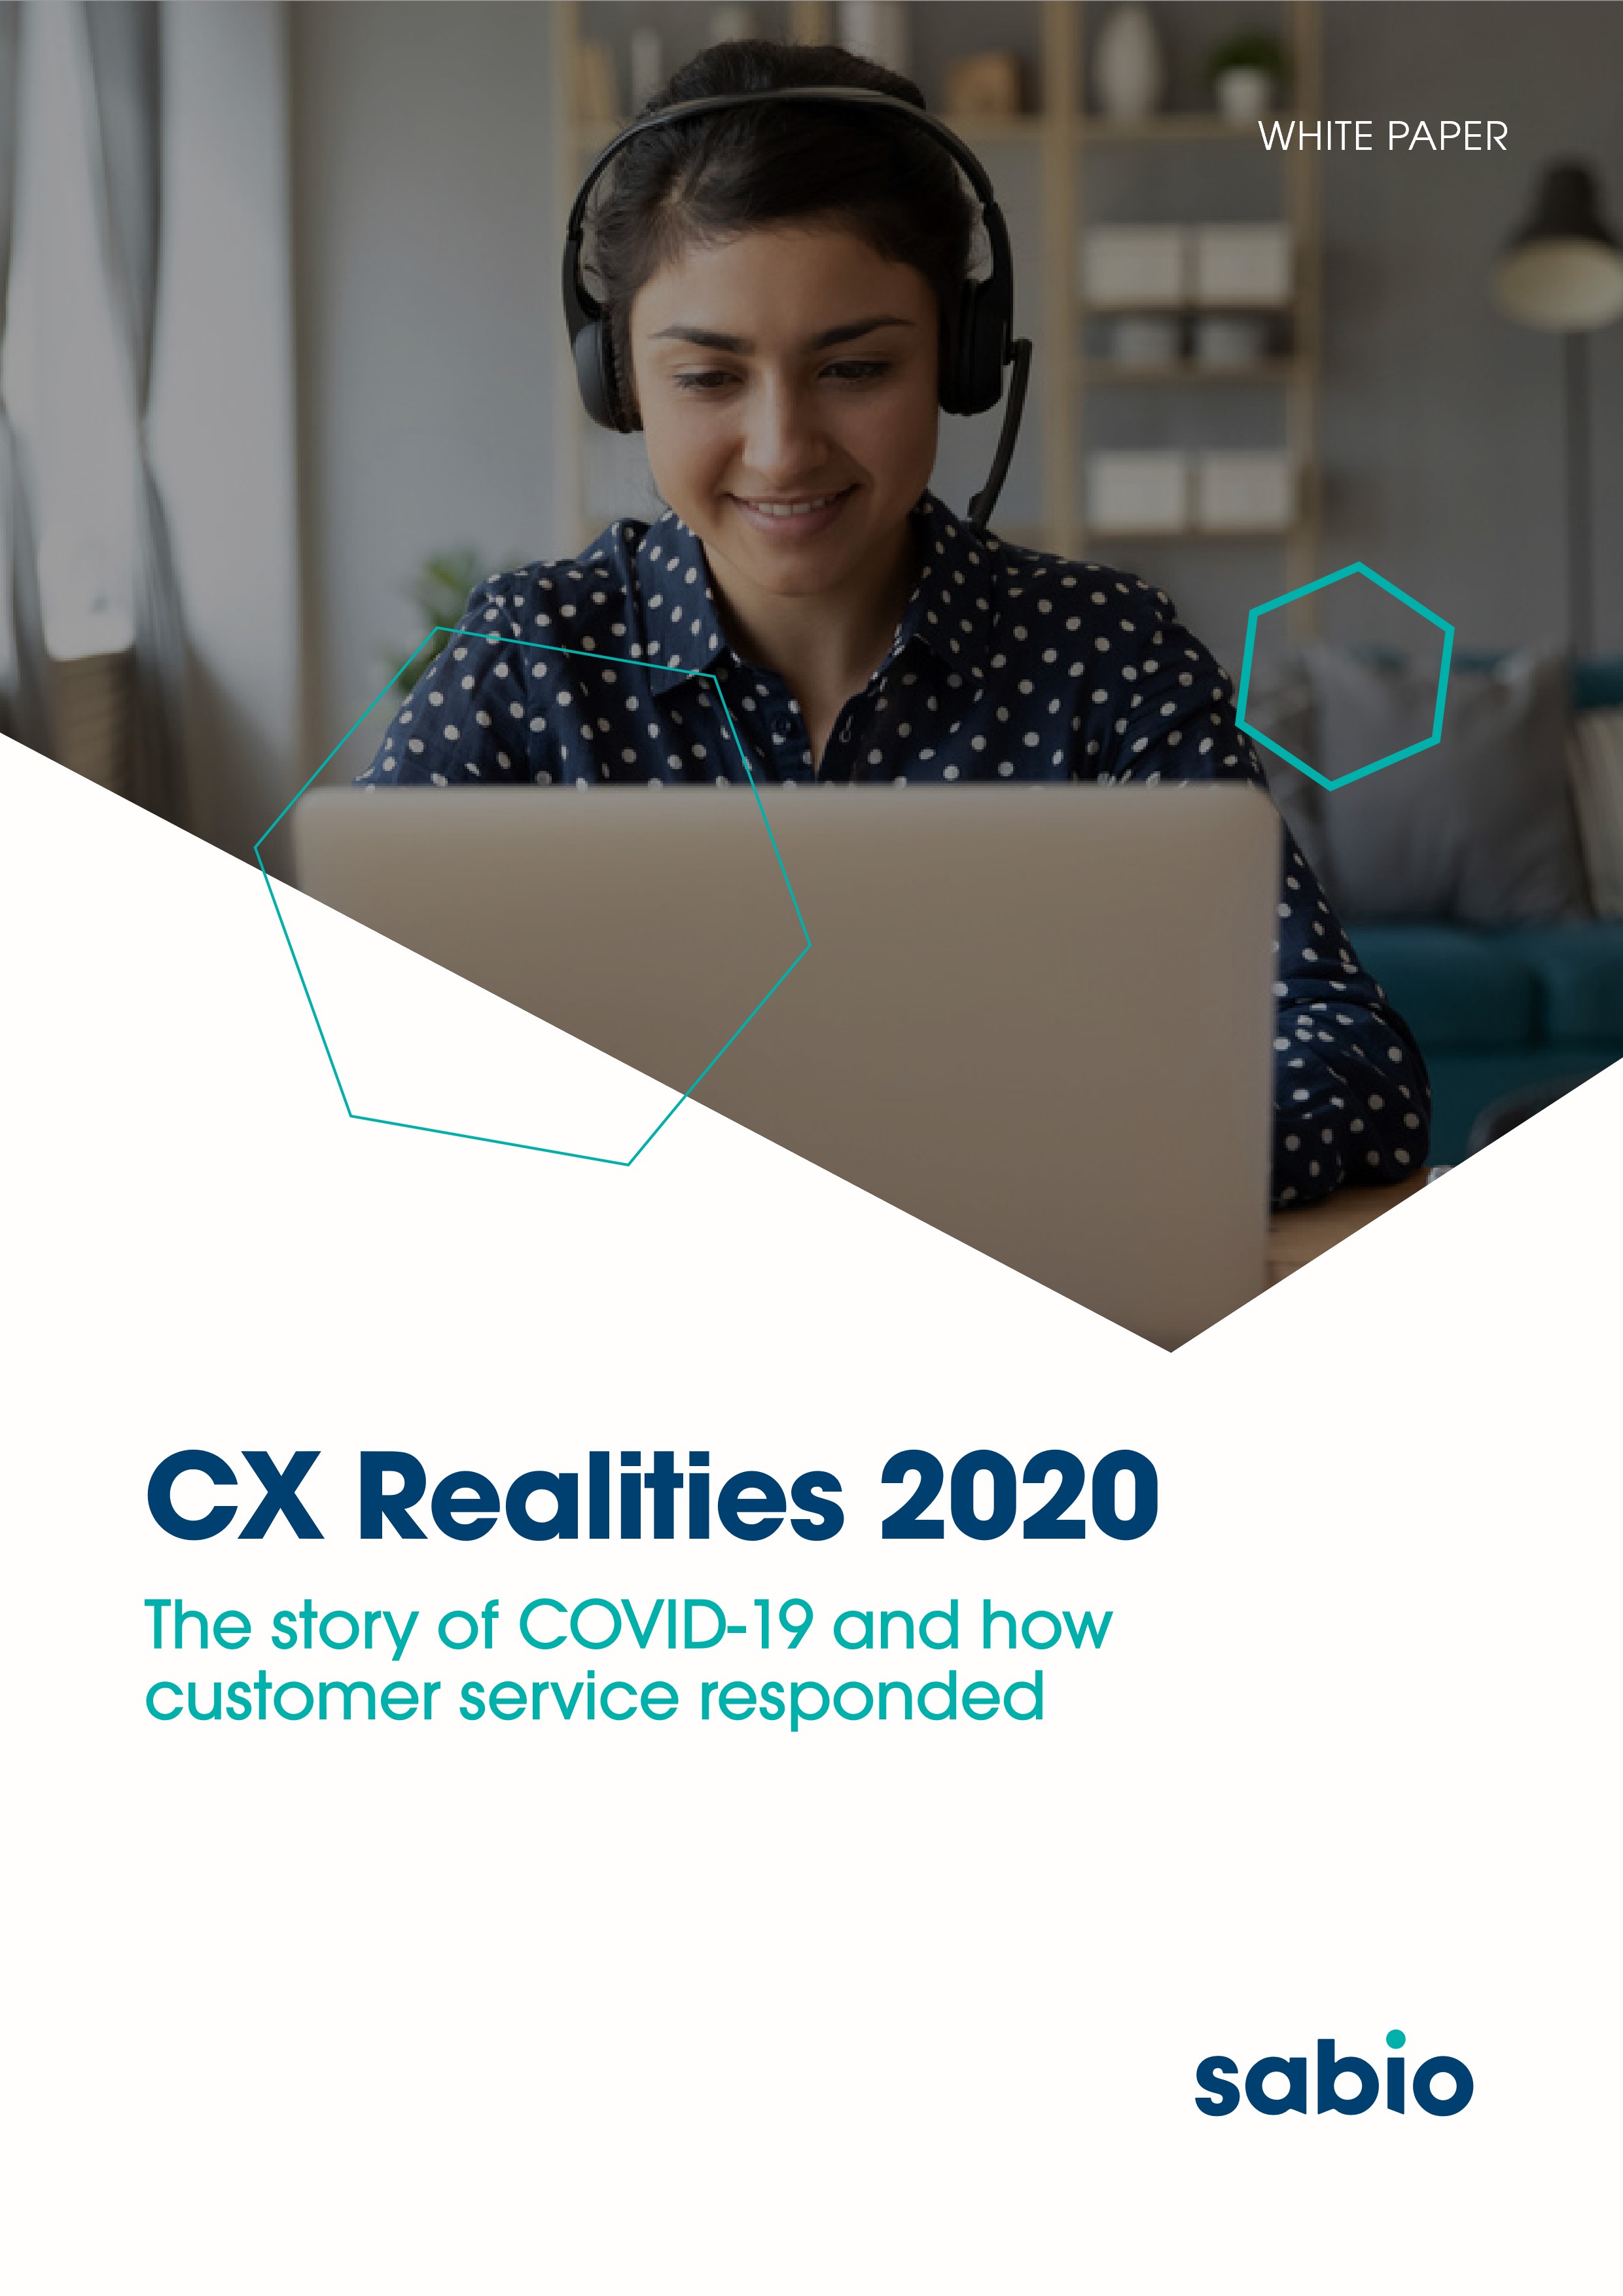 CX Realities 2020 - The story of COVID-19 and how customer service responded